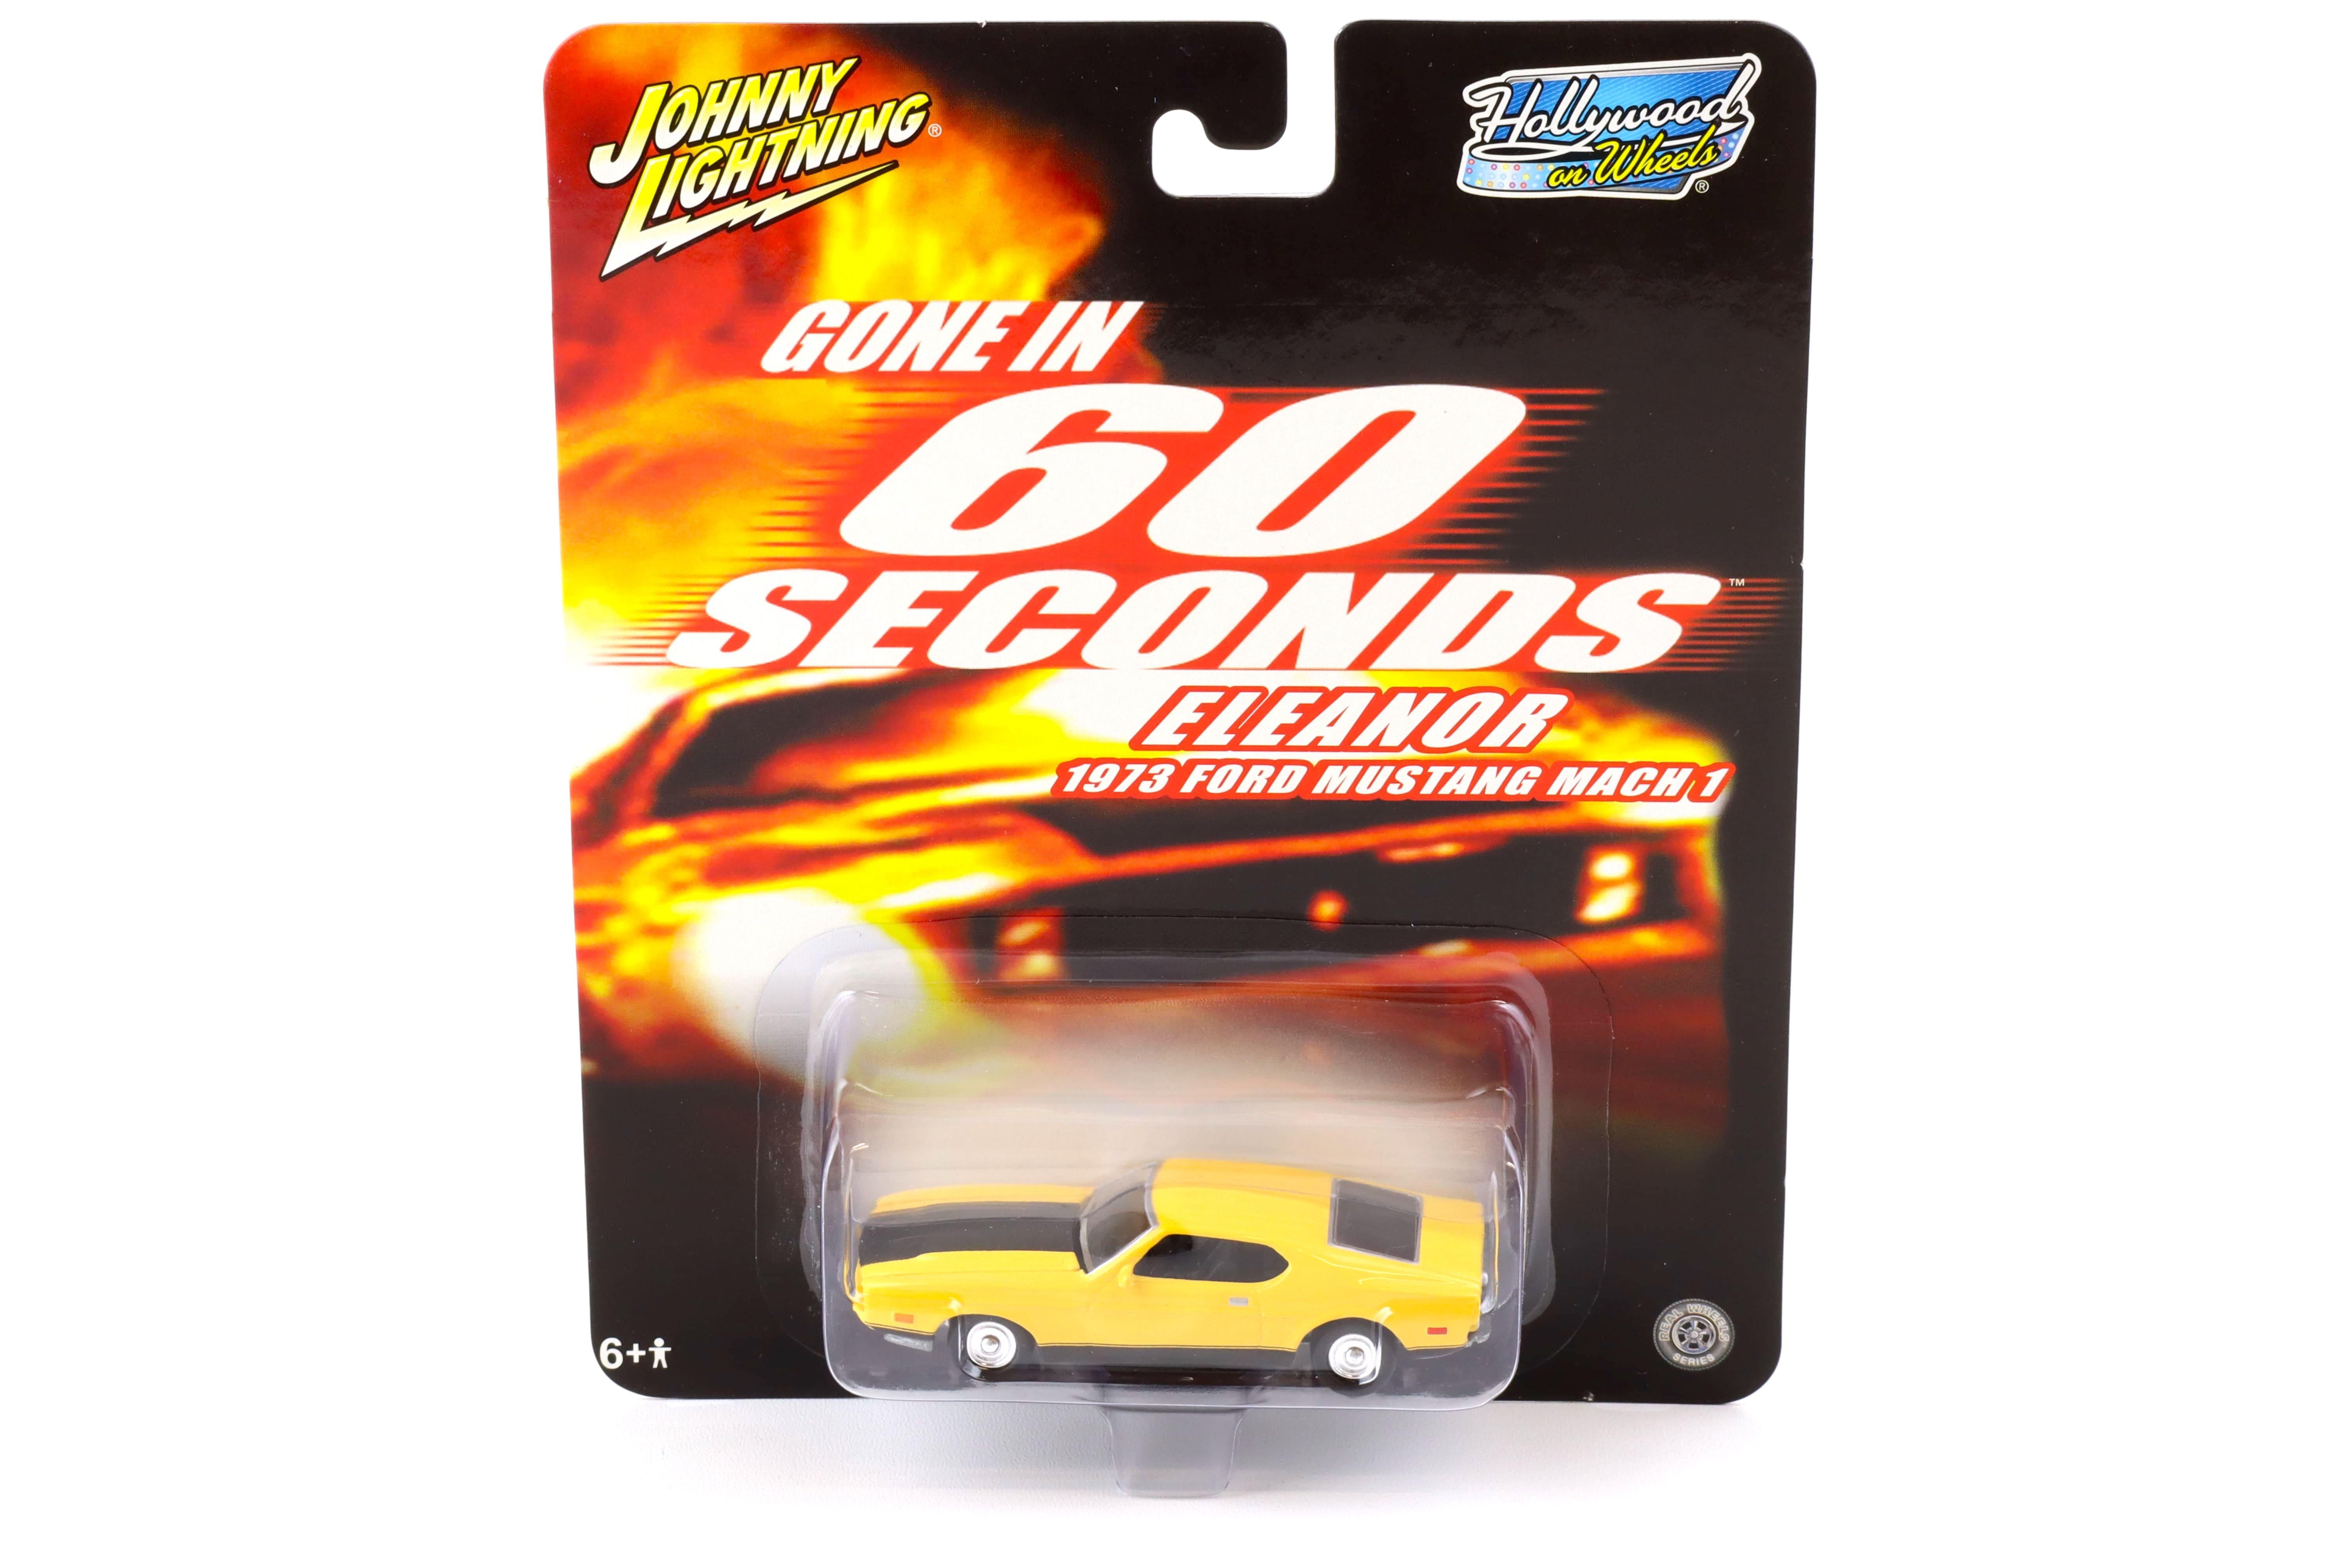 1:64 Johnny Lightning 1973 Ford Mustang Mach 1 yellow GONE IN 60 SECONDS